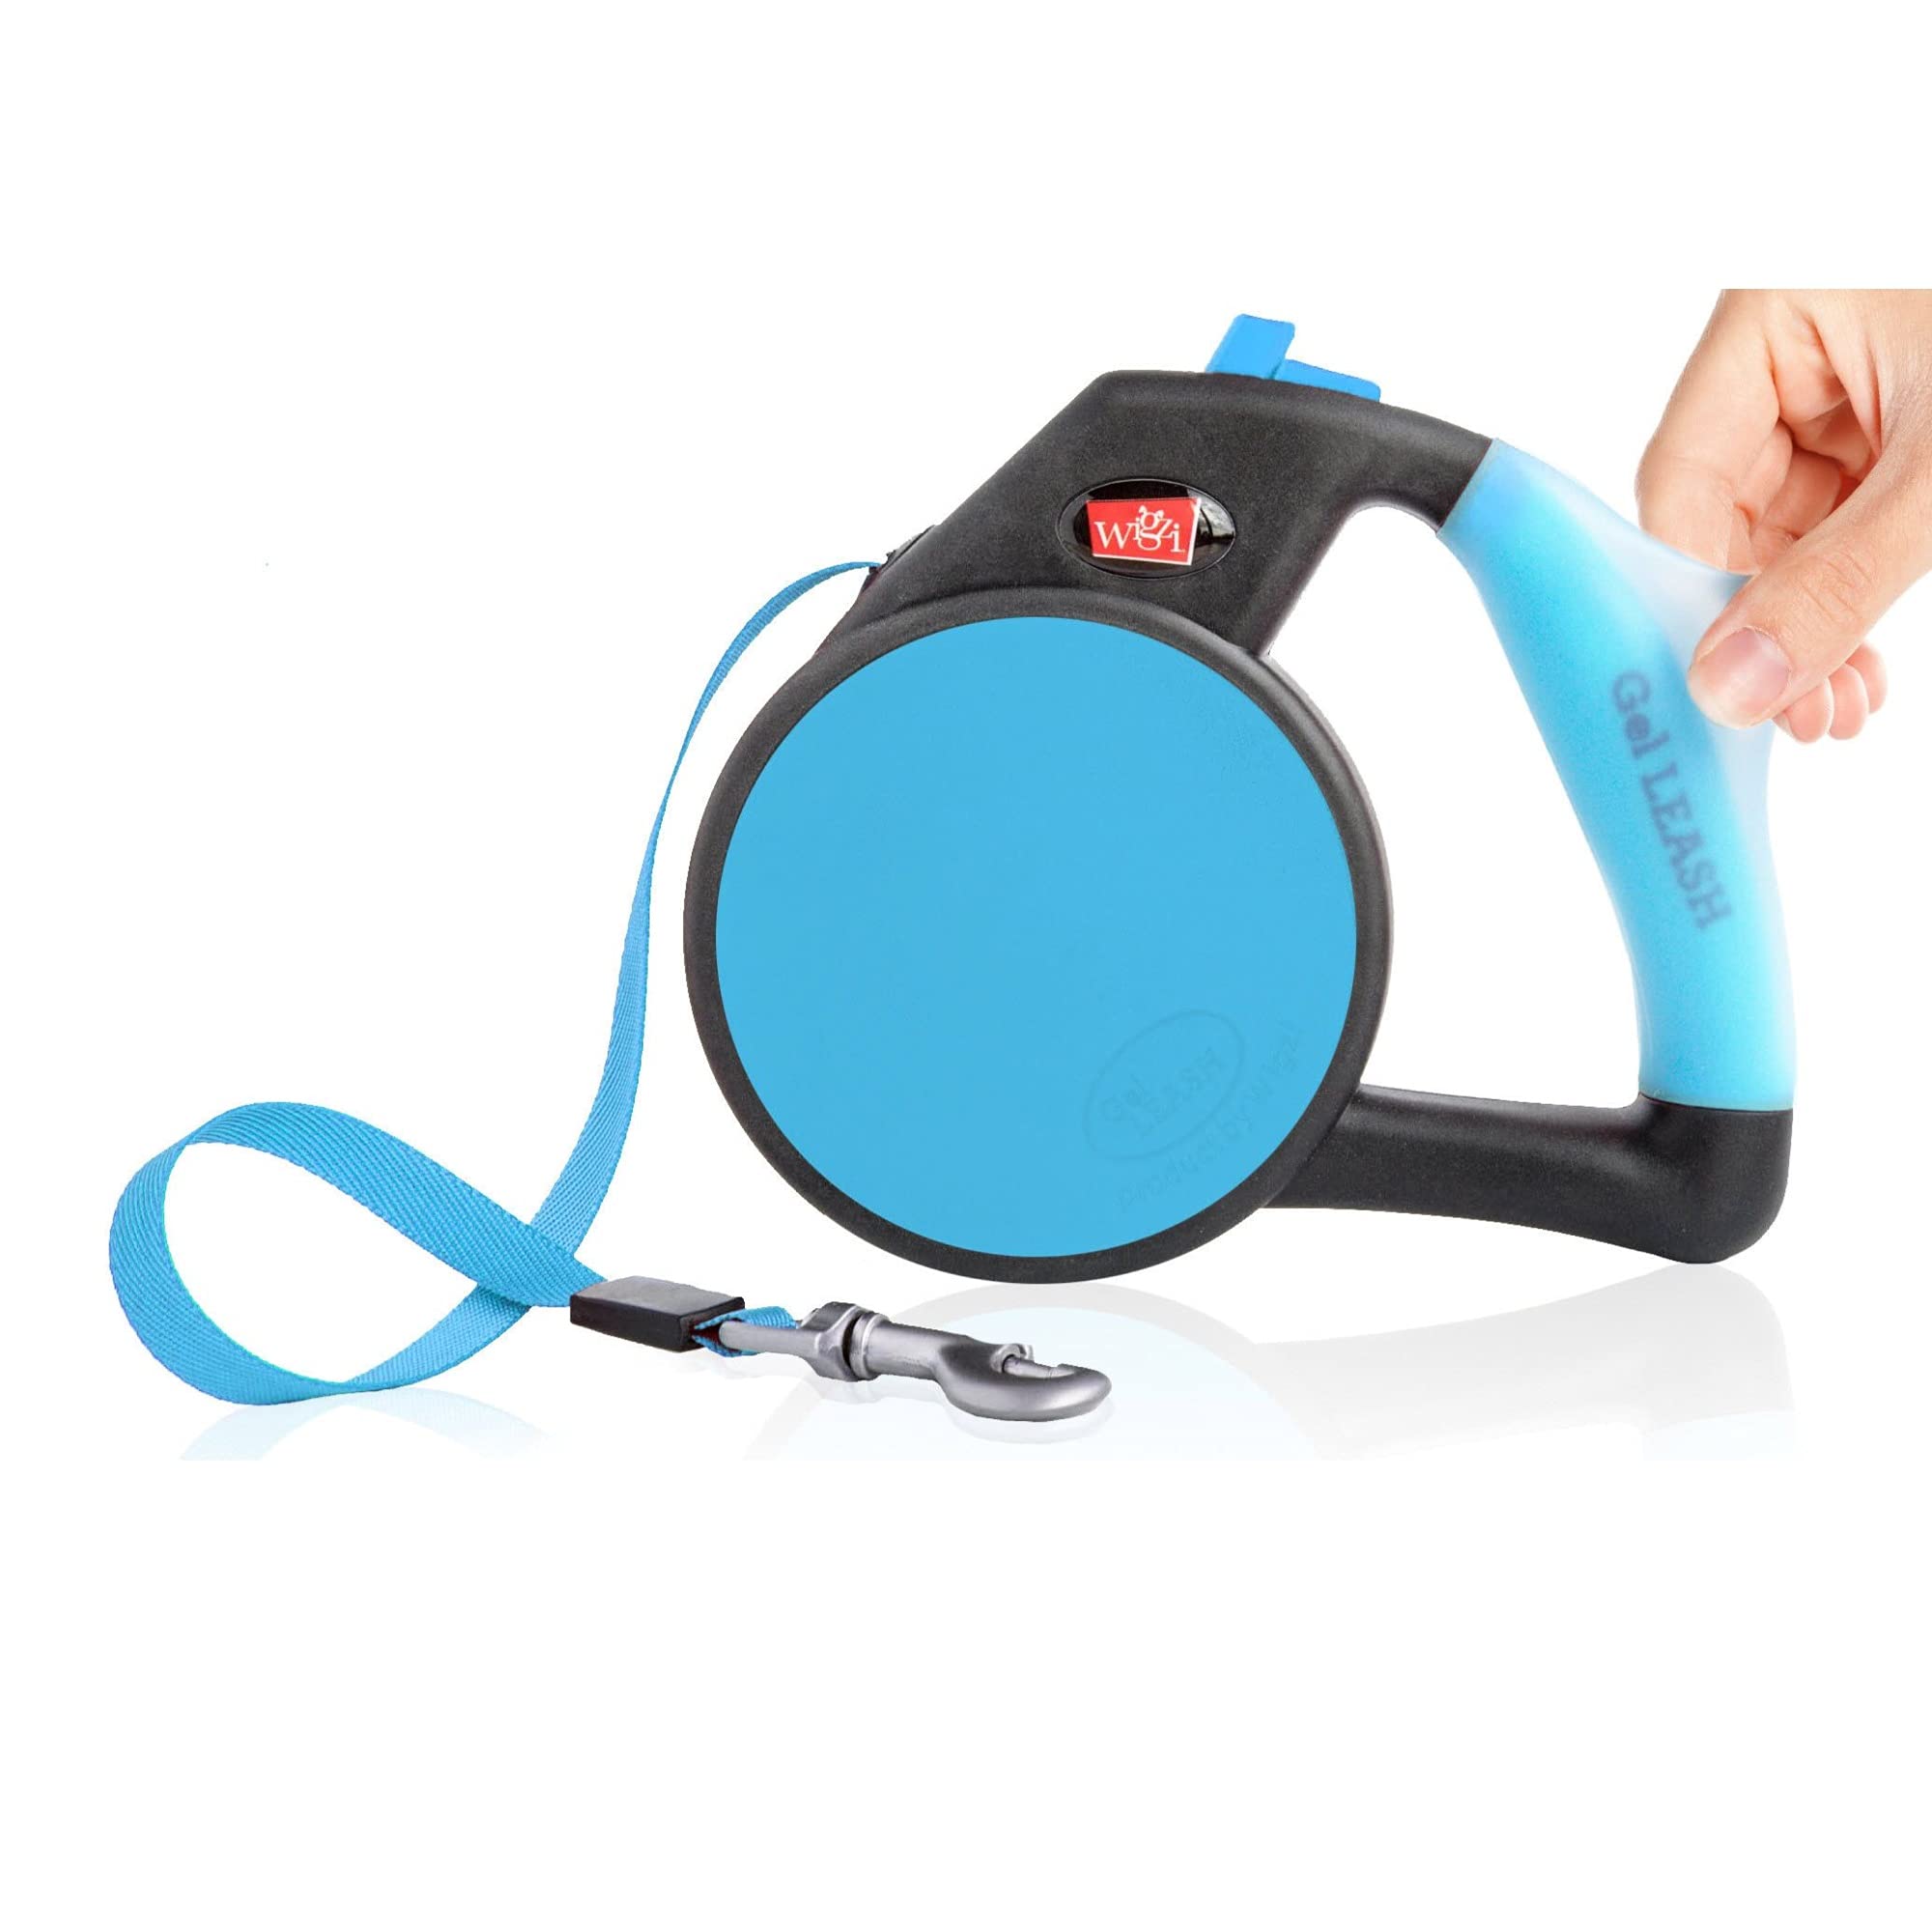 Wigzi Gel Handle Gripped Tape Retractable Nylon Dog Leash - Blue - Large - Up to 16 Feet  